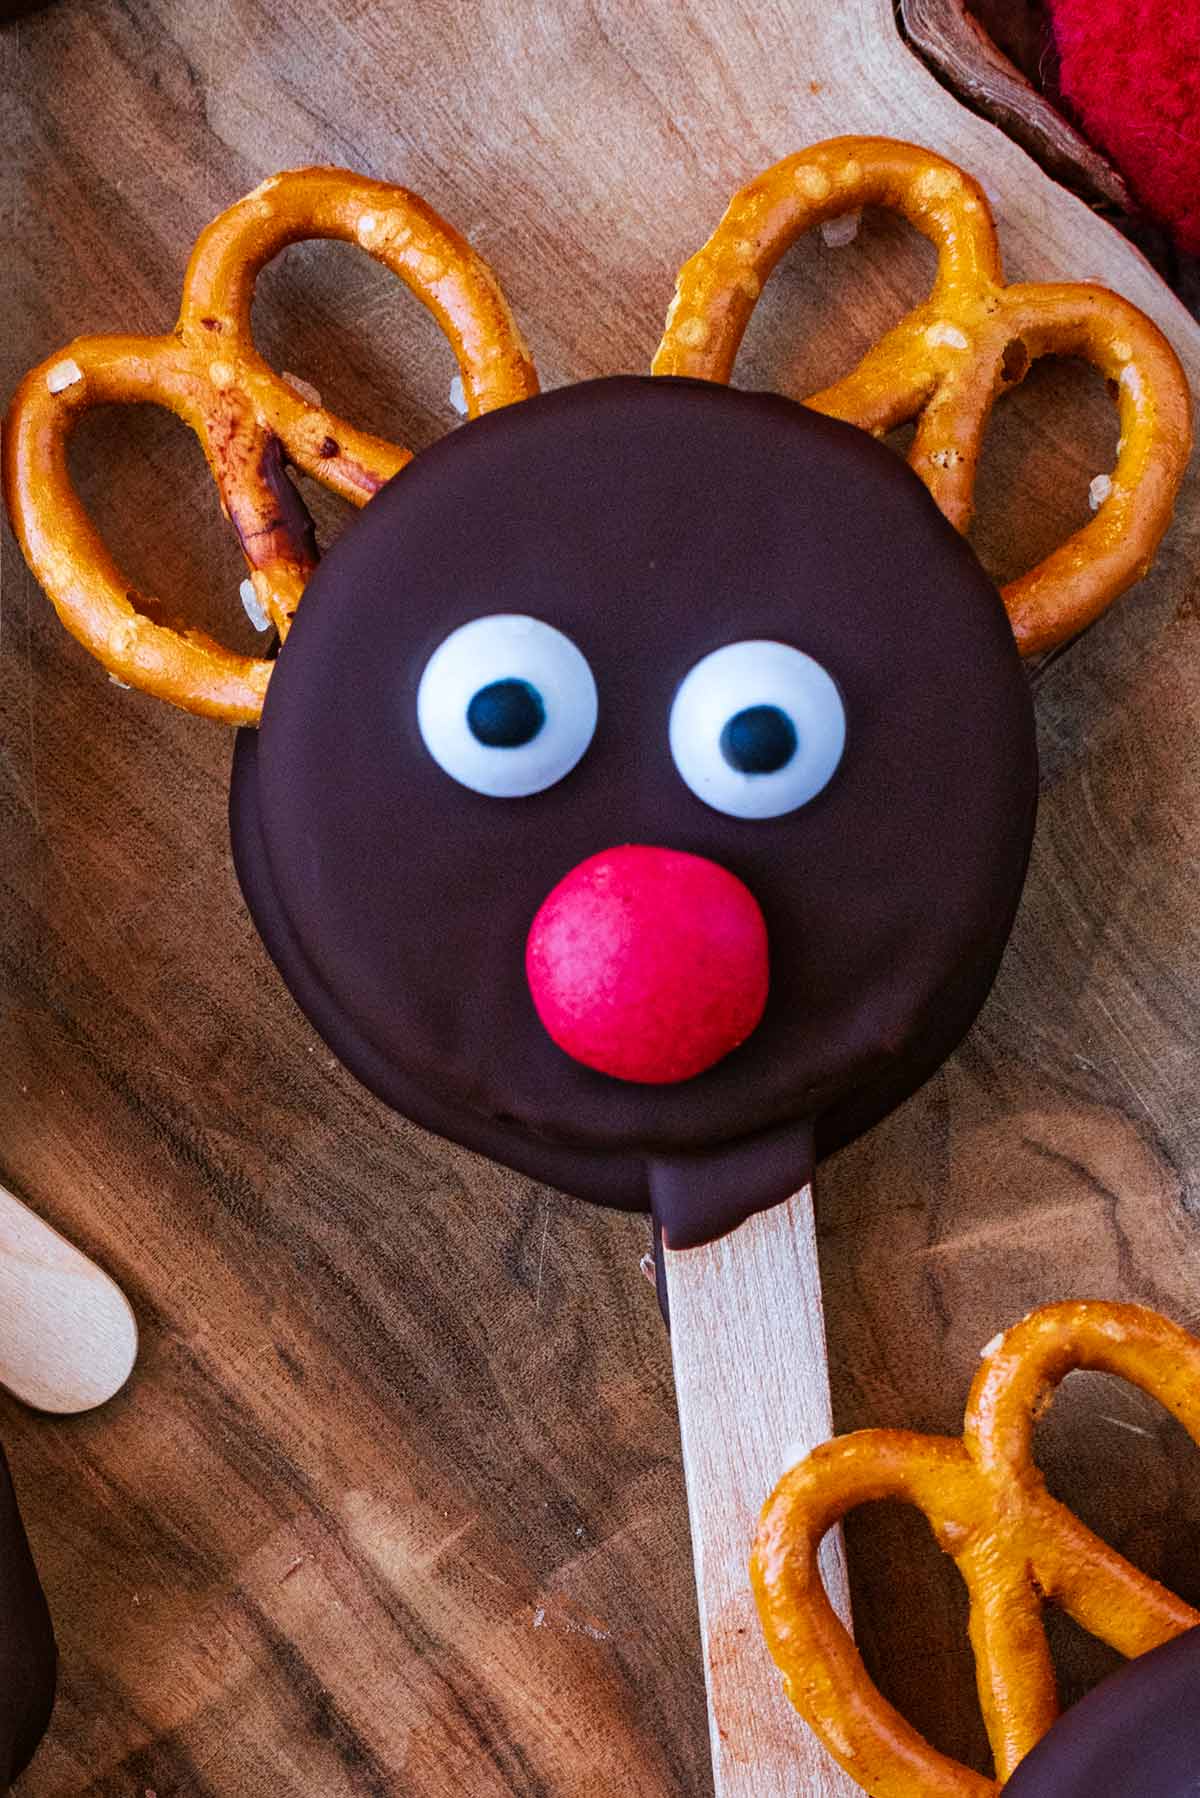 A chocolate coated Oreo with pretzel antlers, a Smartie nose and edible eyes on it.